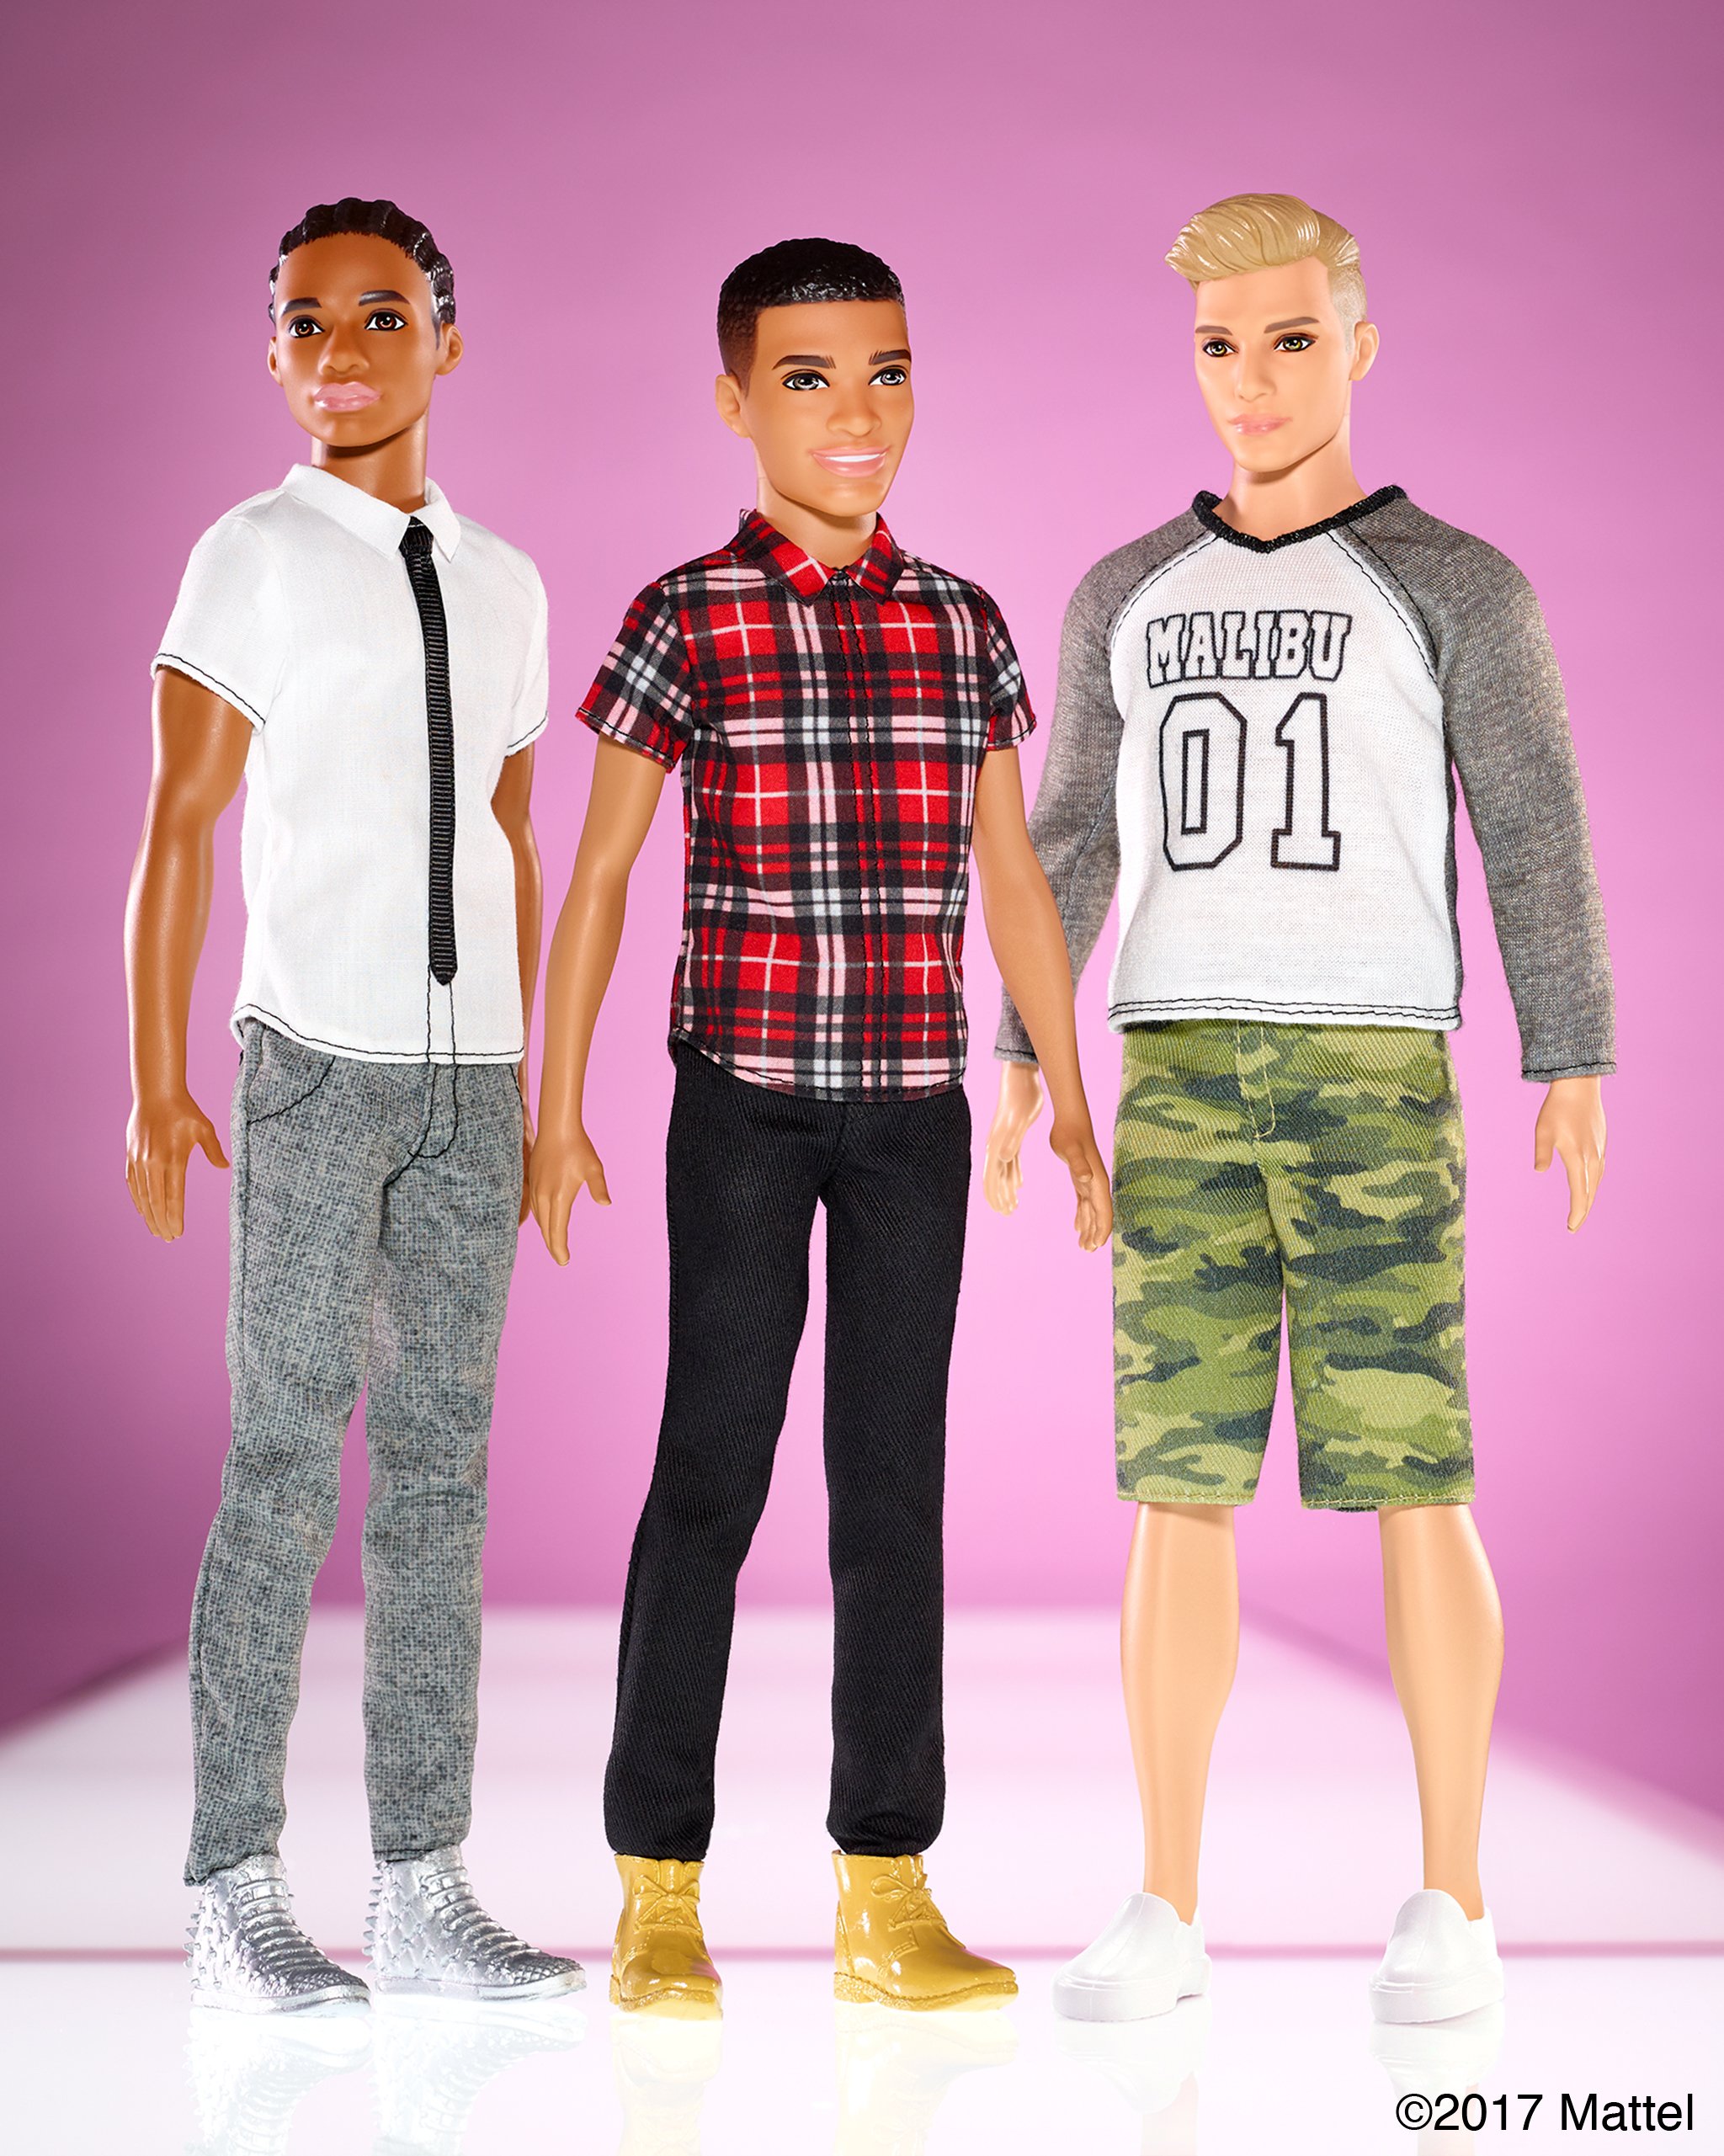 storting Succes Planeet Barbie on Twitter: "Meet Next Gen Ken! Ken is now available in 3 body  types–broad, slim, and original. #TheDollEvolves https://t.co/svI1mbvDMP" /  Twitter